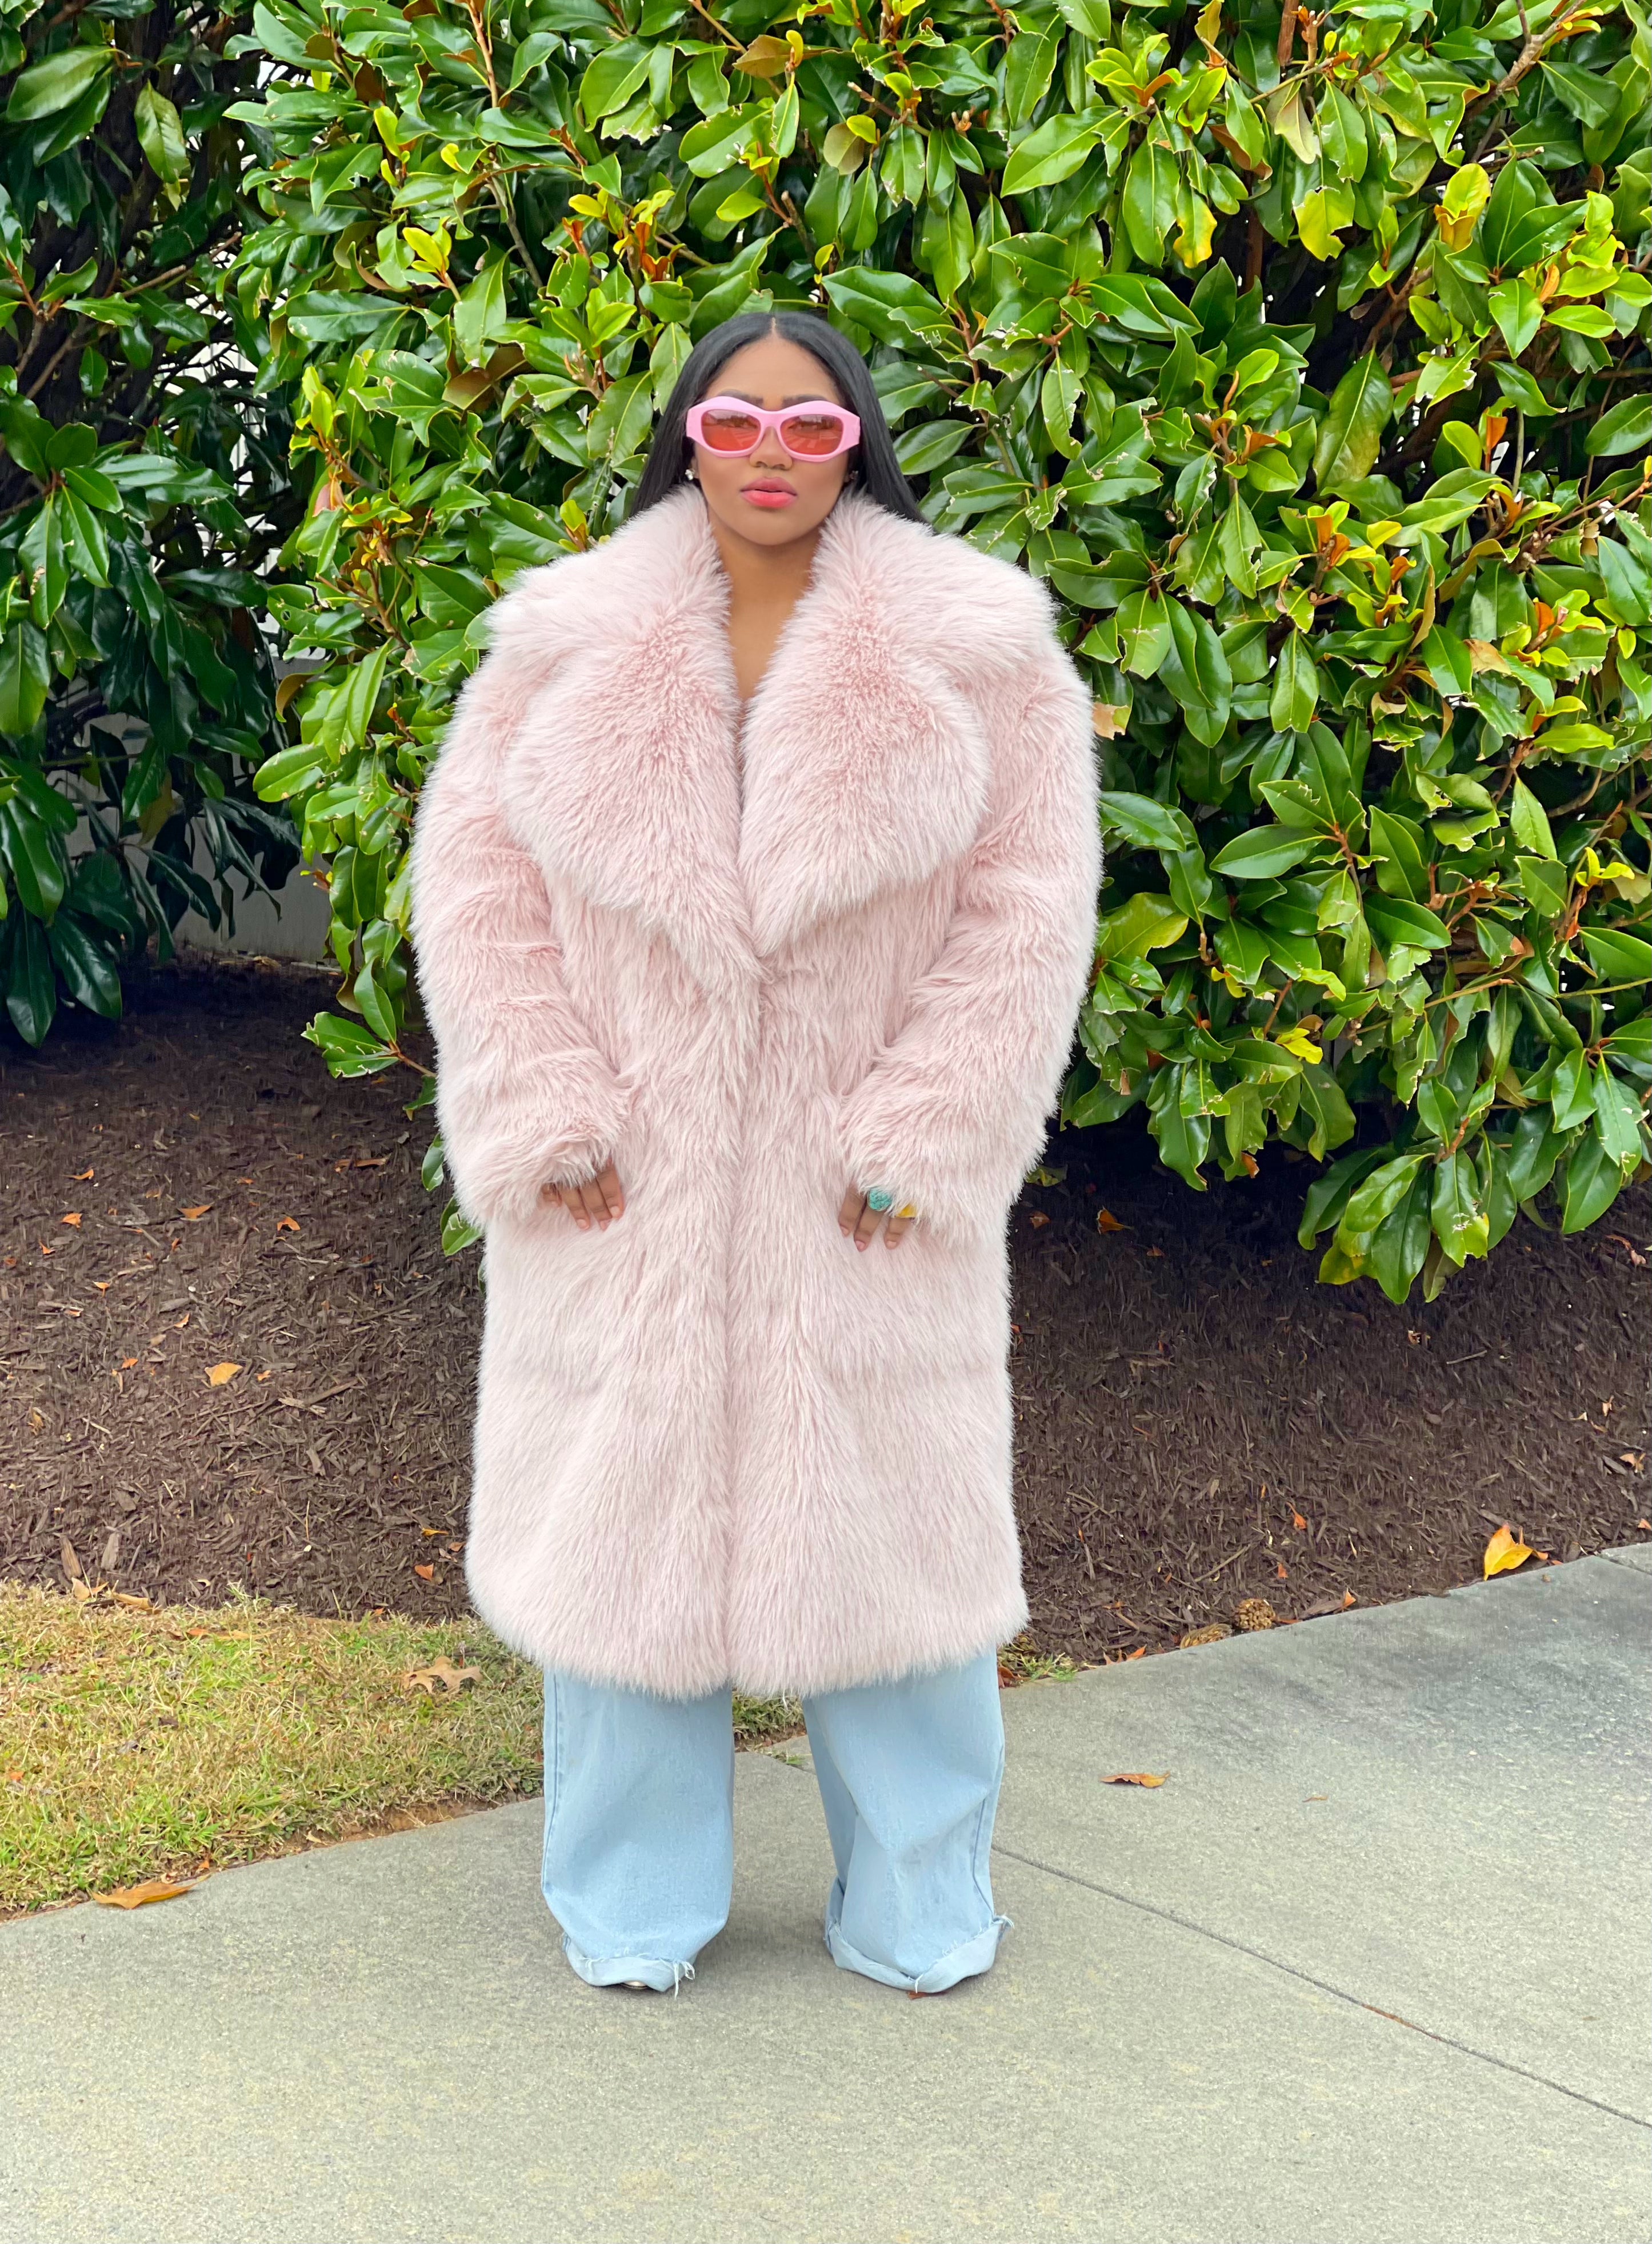 GOLDxTEAL pink fluffy faux fur coat. Stunning vegan fur coat with wide lapels and oversized pockets.